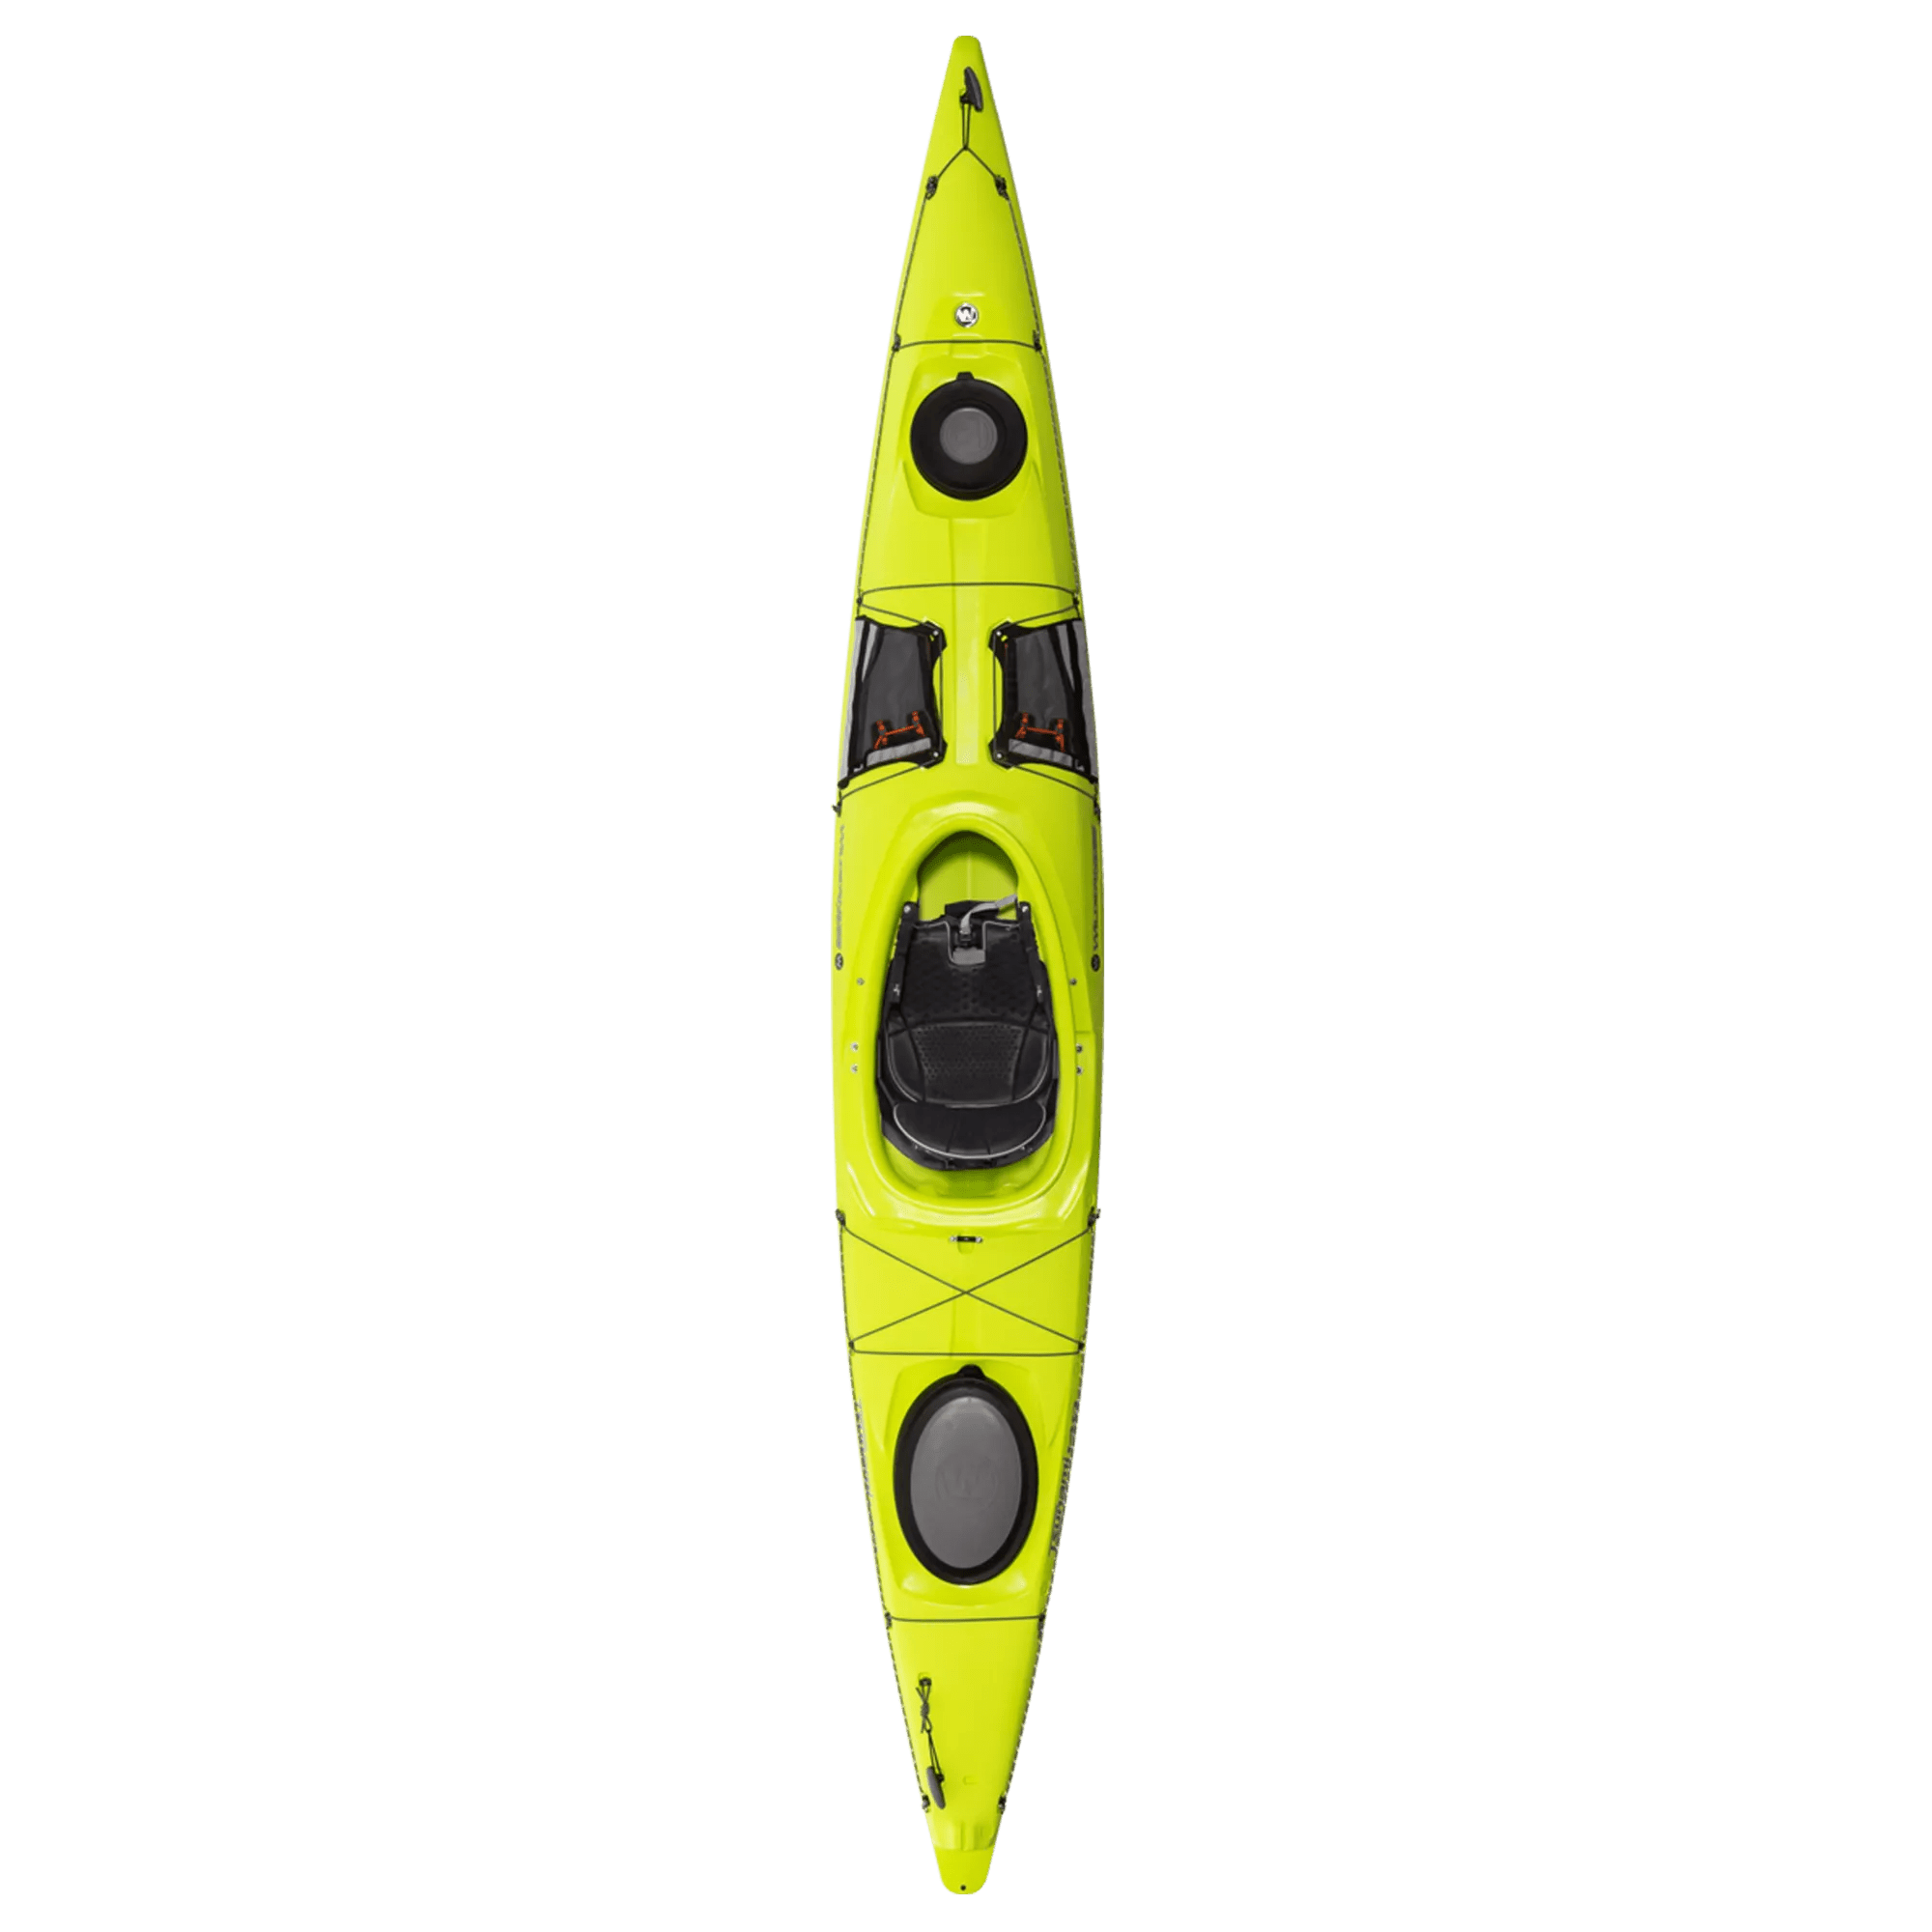 WILDERNESS SYSTEMS - Tsunami 140 Day Touring Kayak with Rudder - Discontinued color/model - Yellow - 9720418180 - TOP 